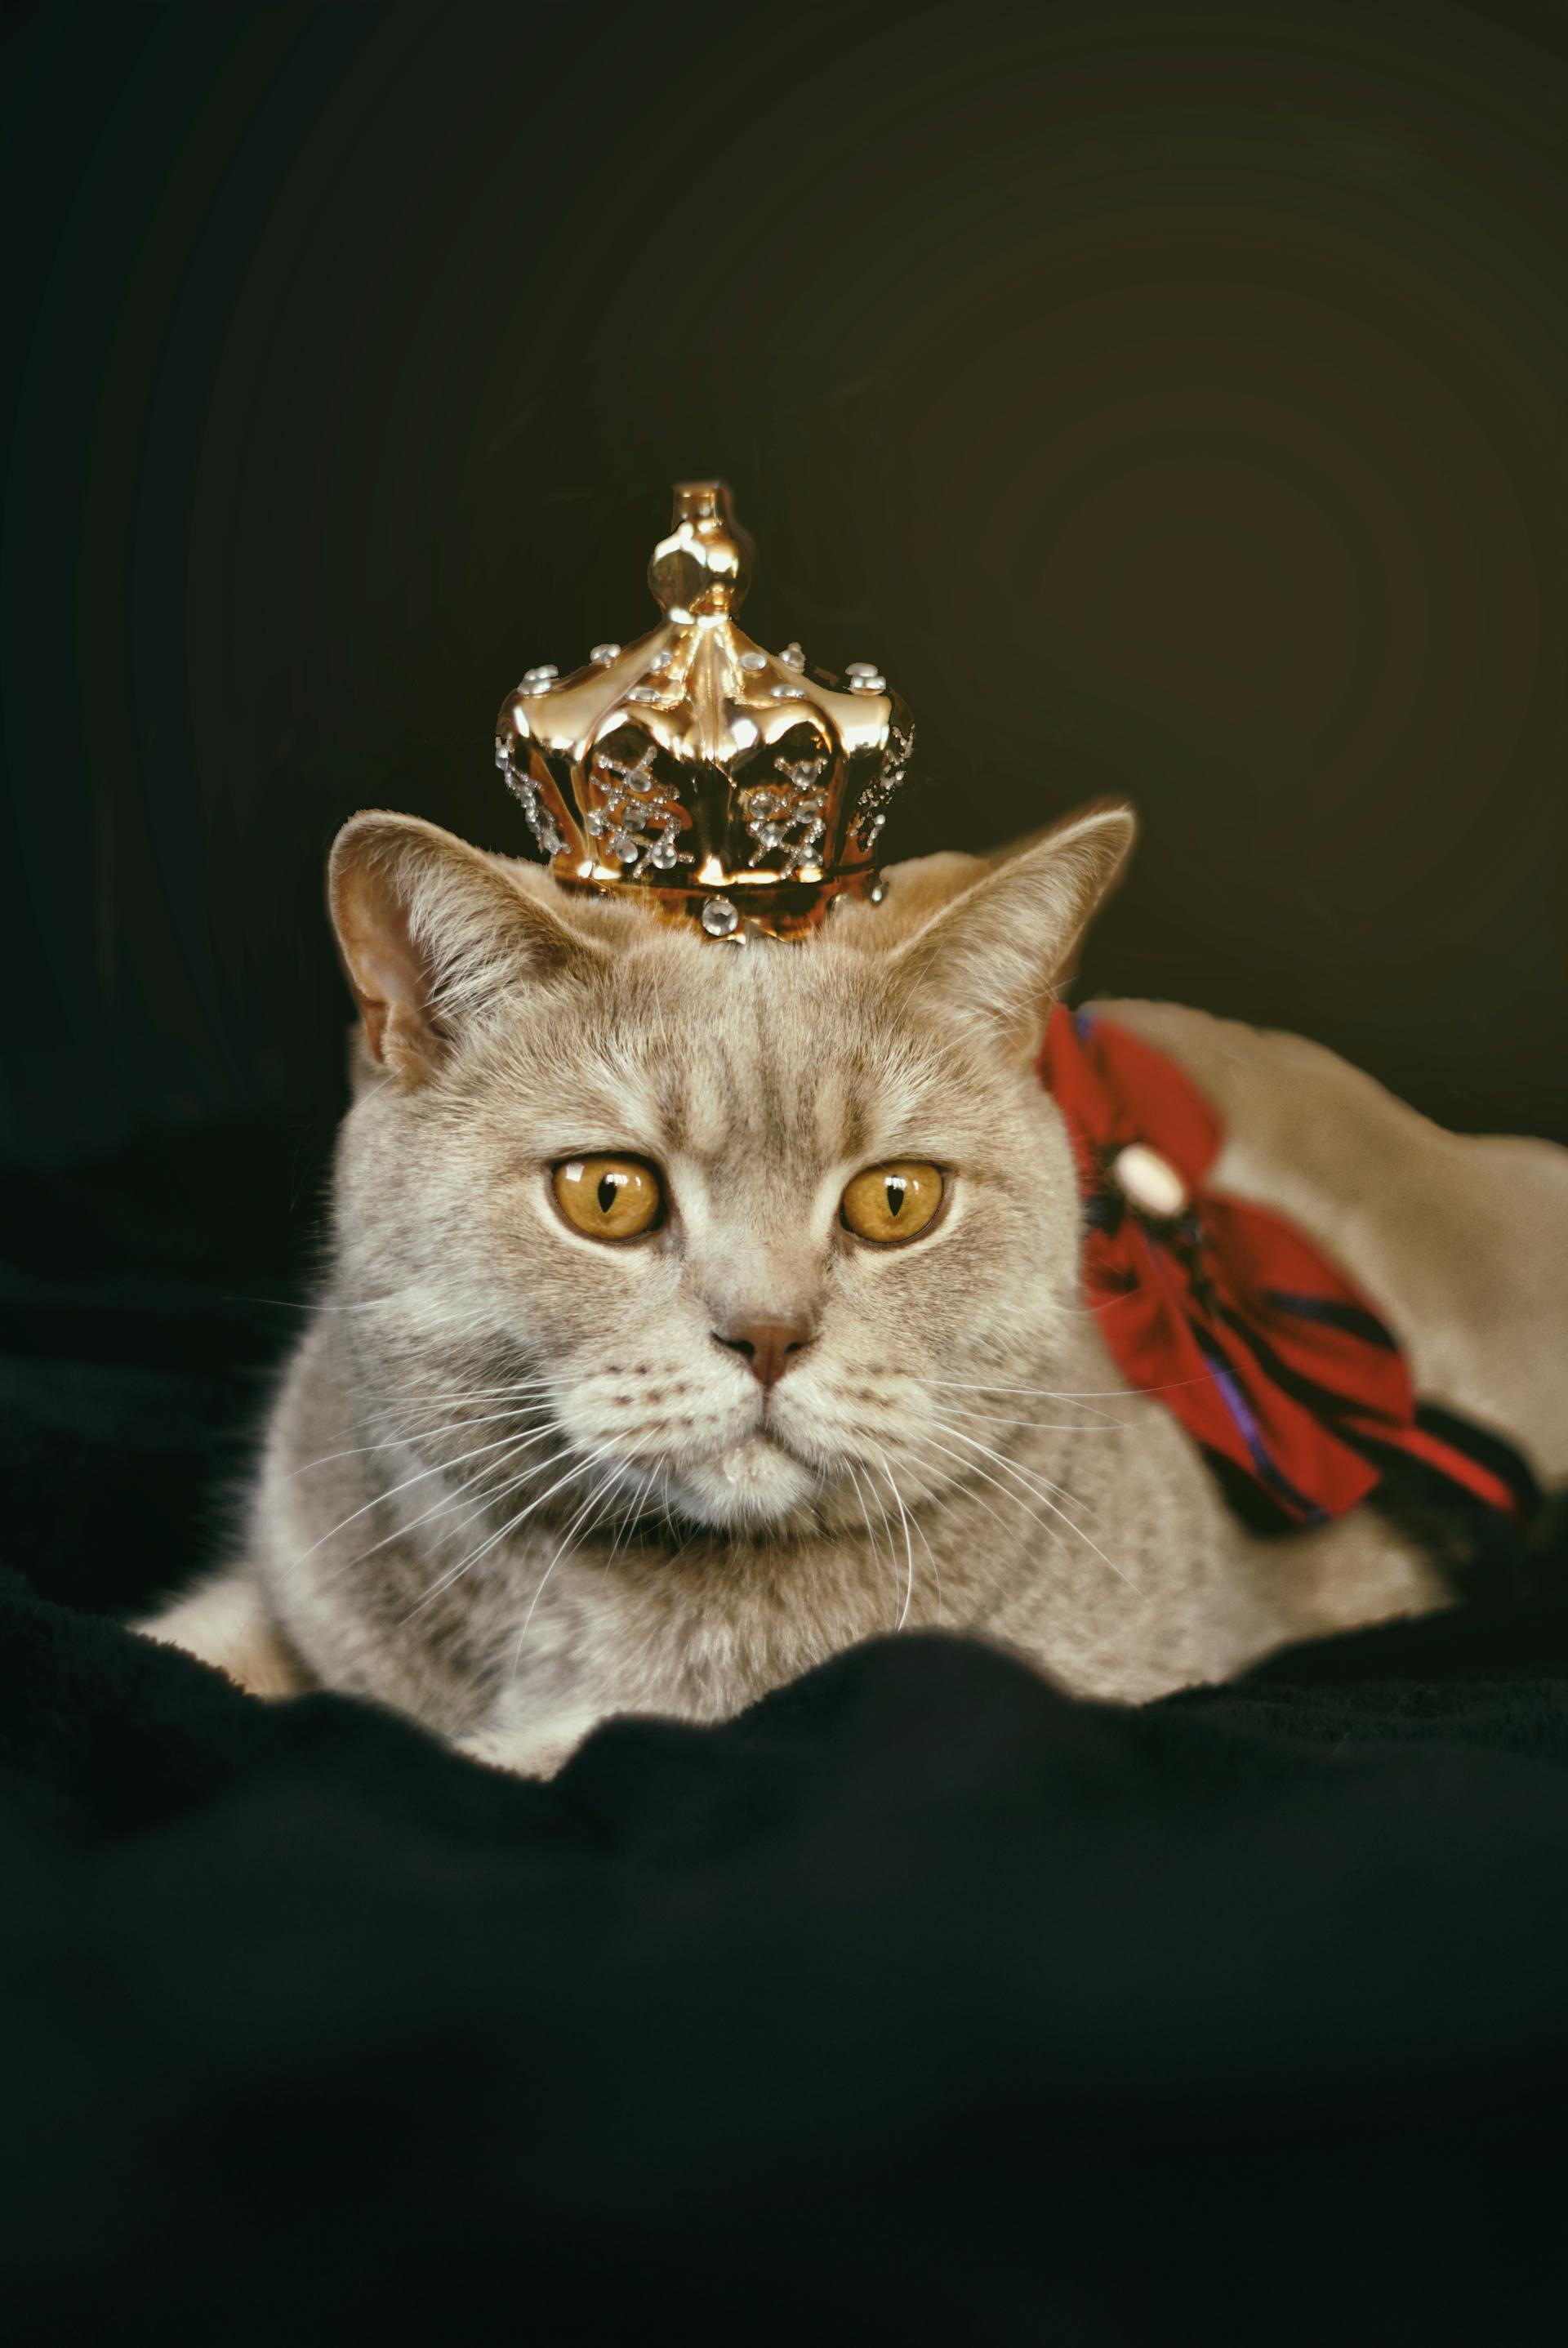 A cat with a crown | Source: Pexels